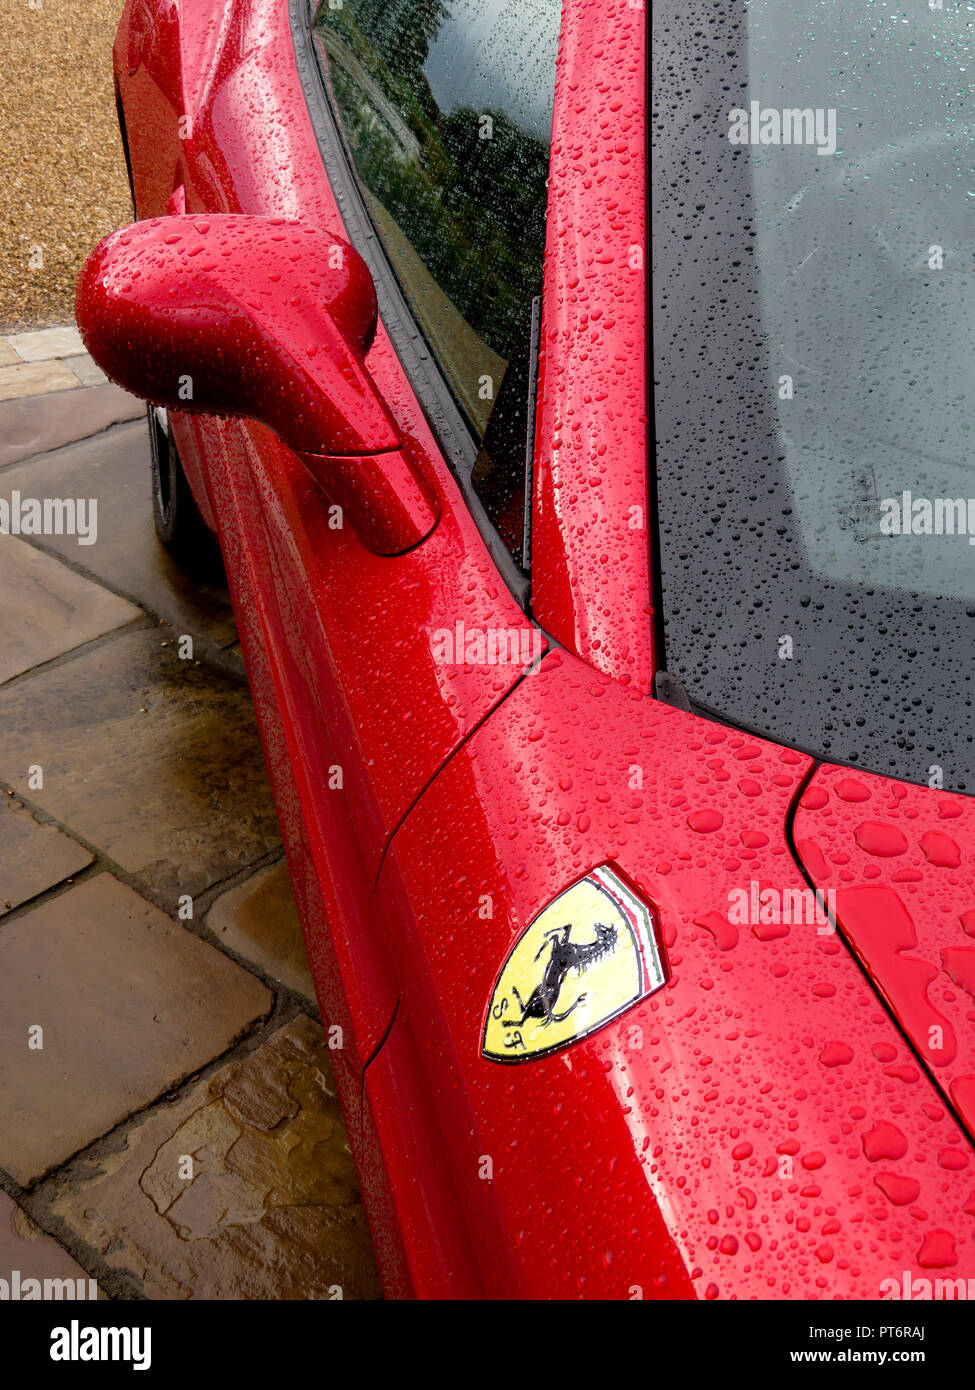 Ferrari wing mirror and logo in the rain showing bodywork from above Stock Photo